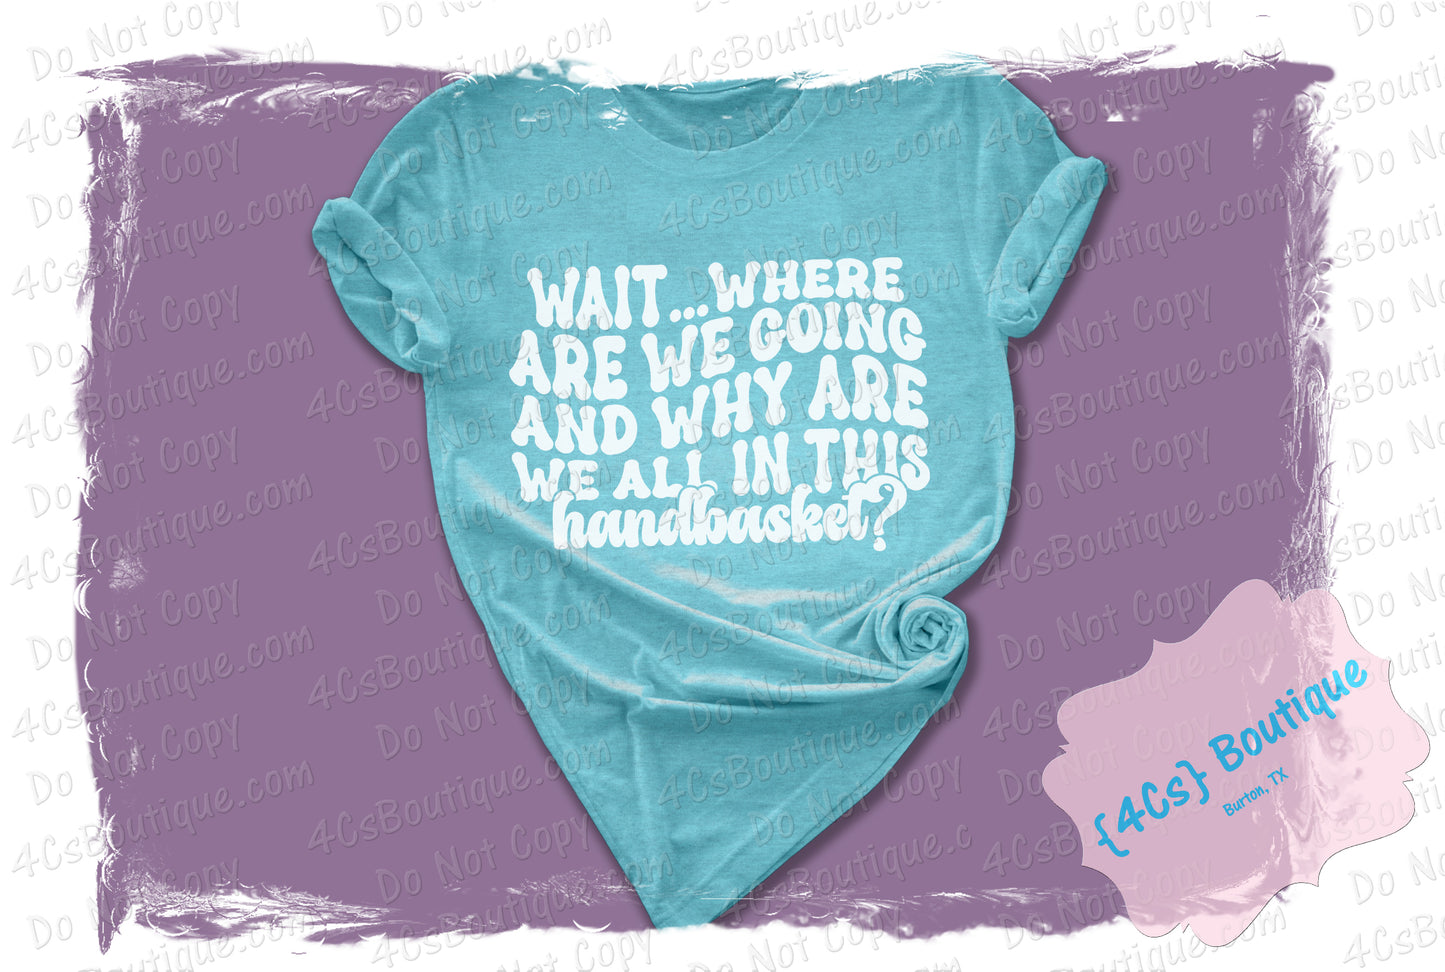 Wait Where Are We Going And Why Are We All In This Handbasket? Shirt